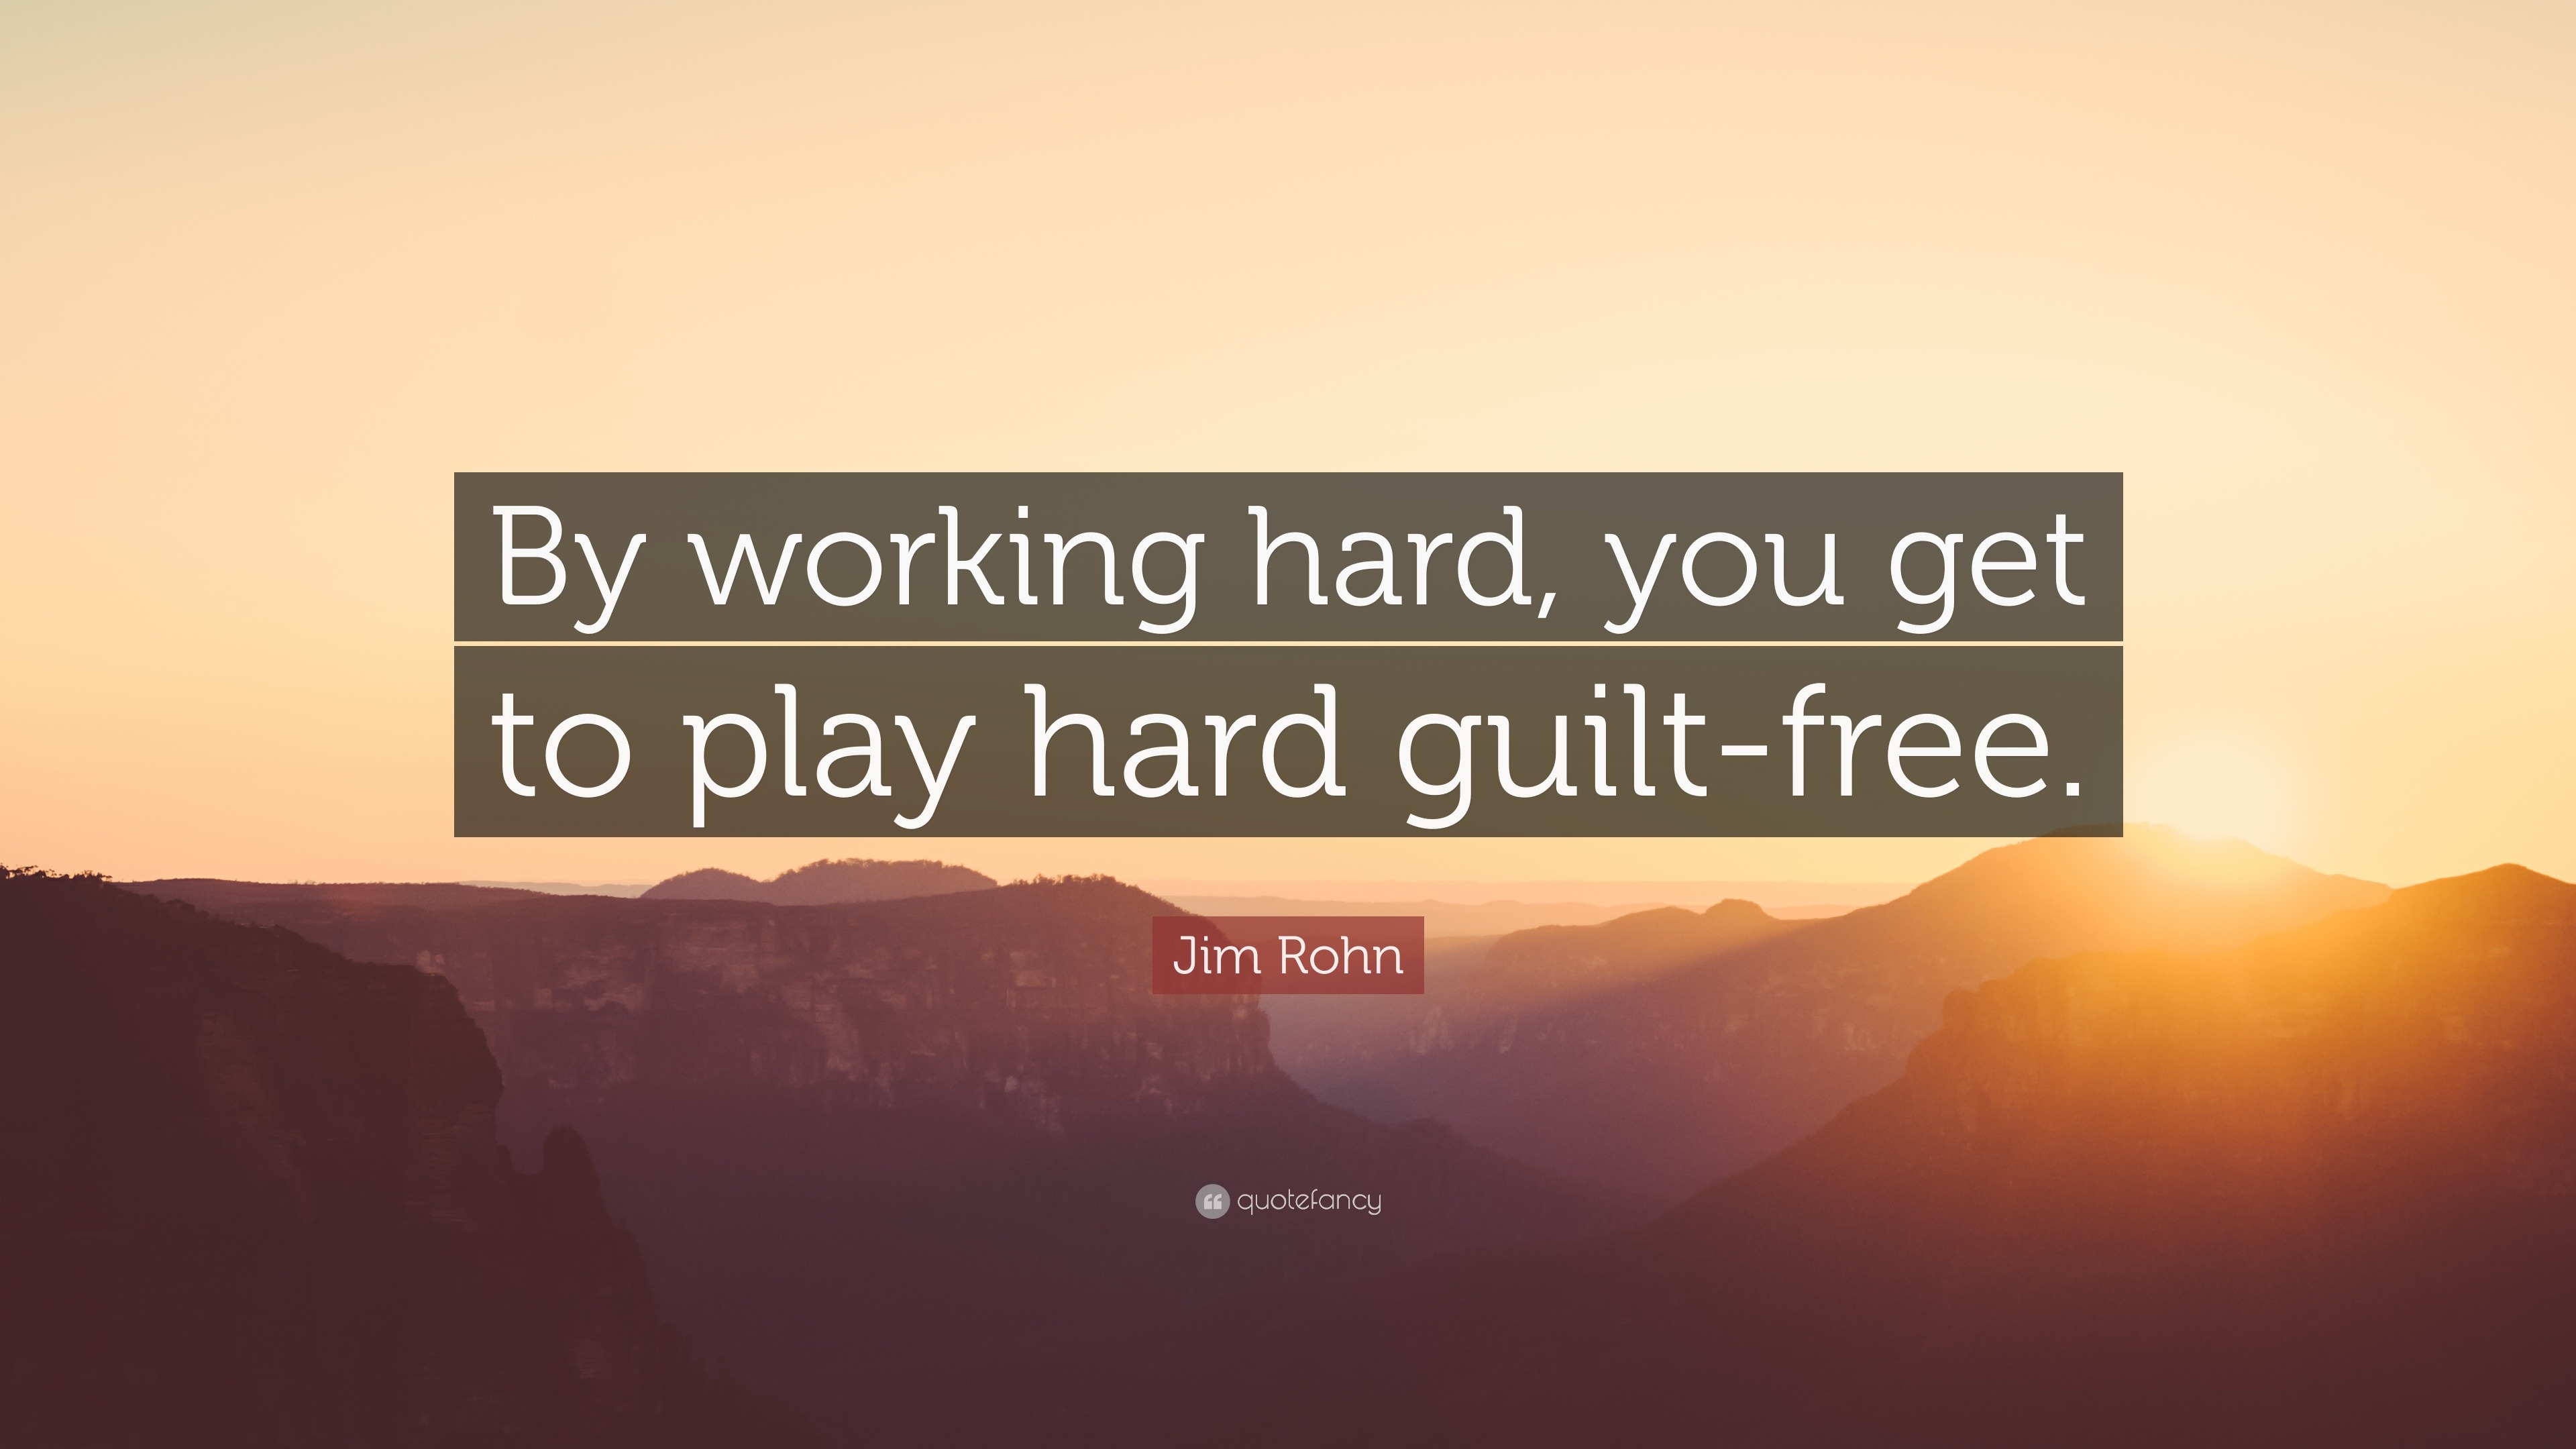 Jim Rohn Quote: "By working hard, you get to play hard guilt-free."